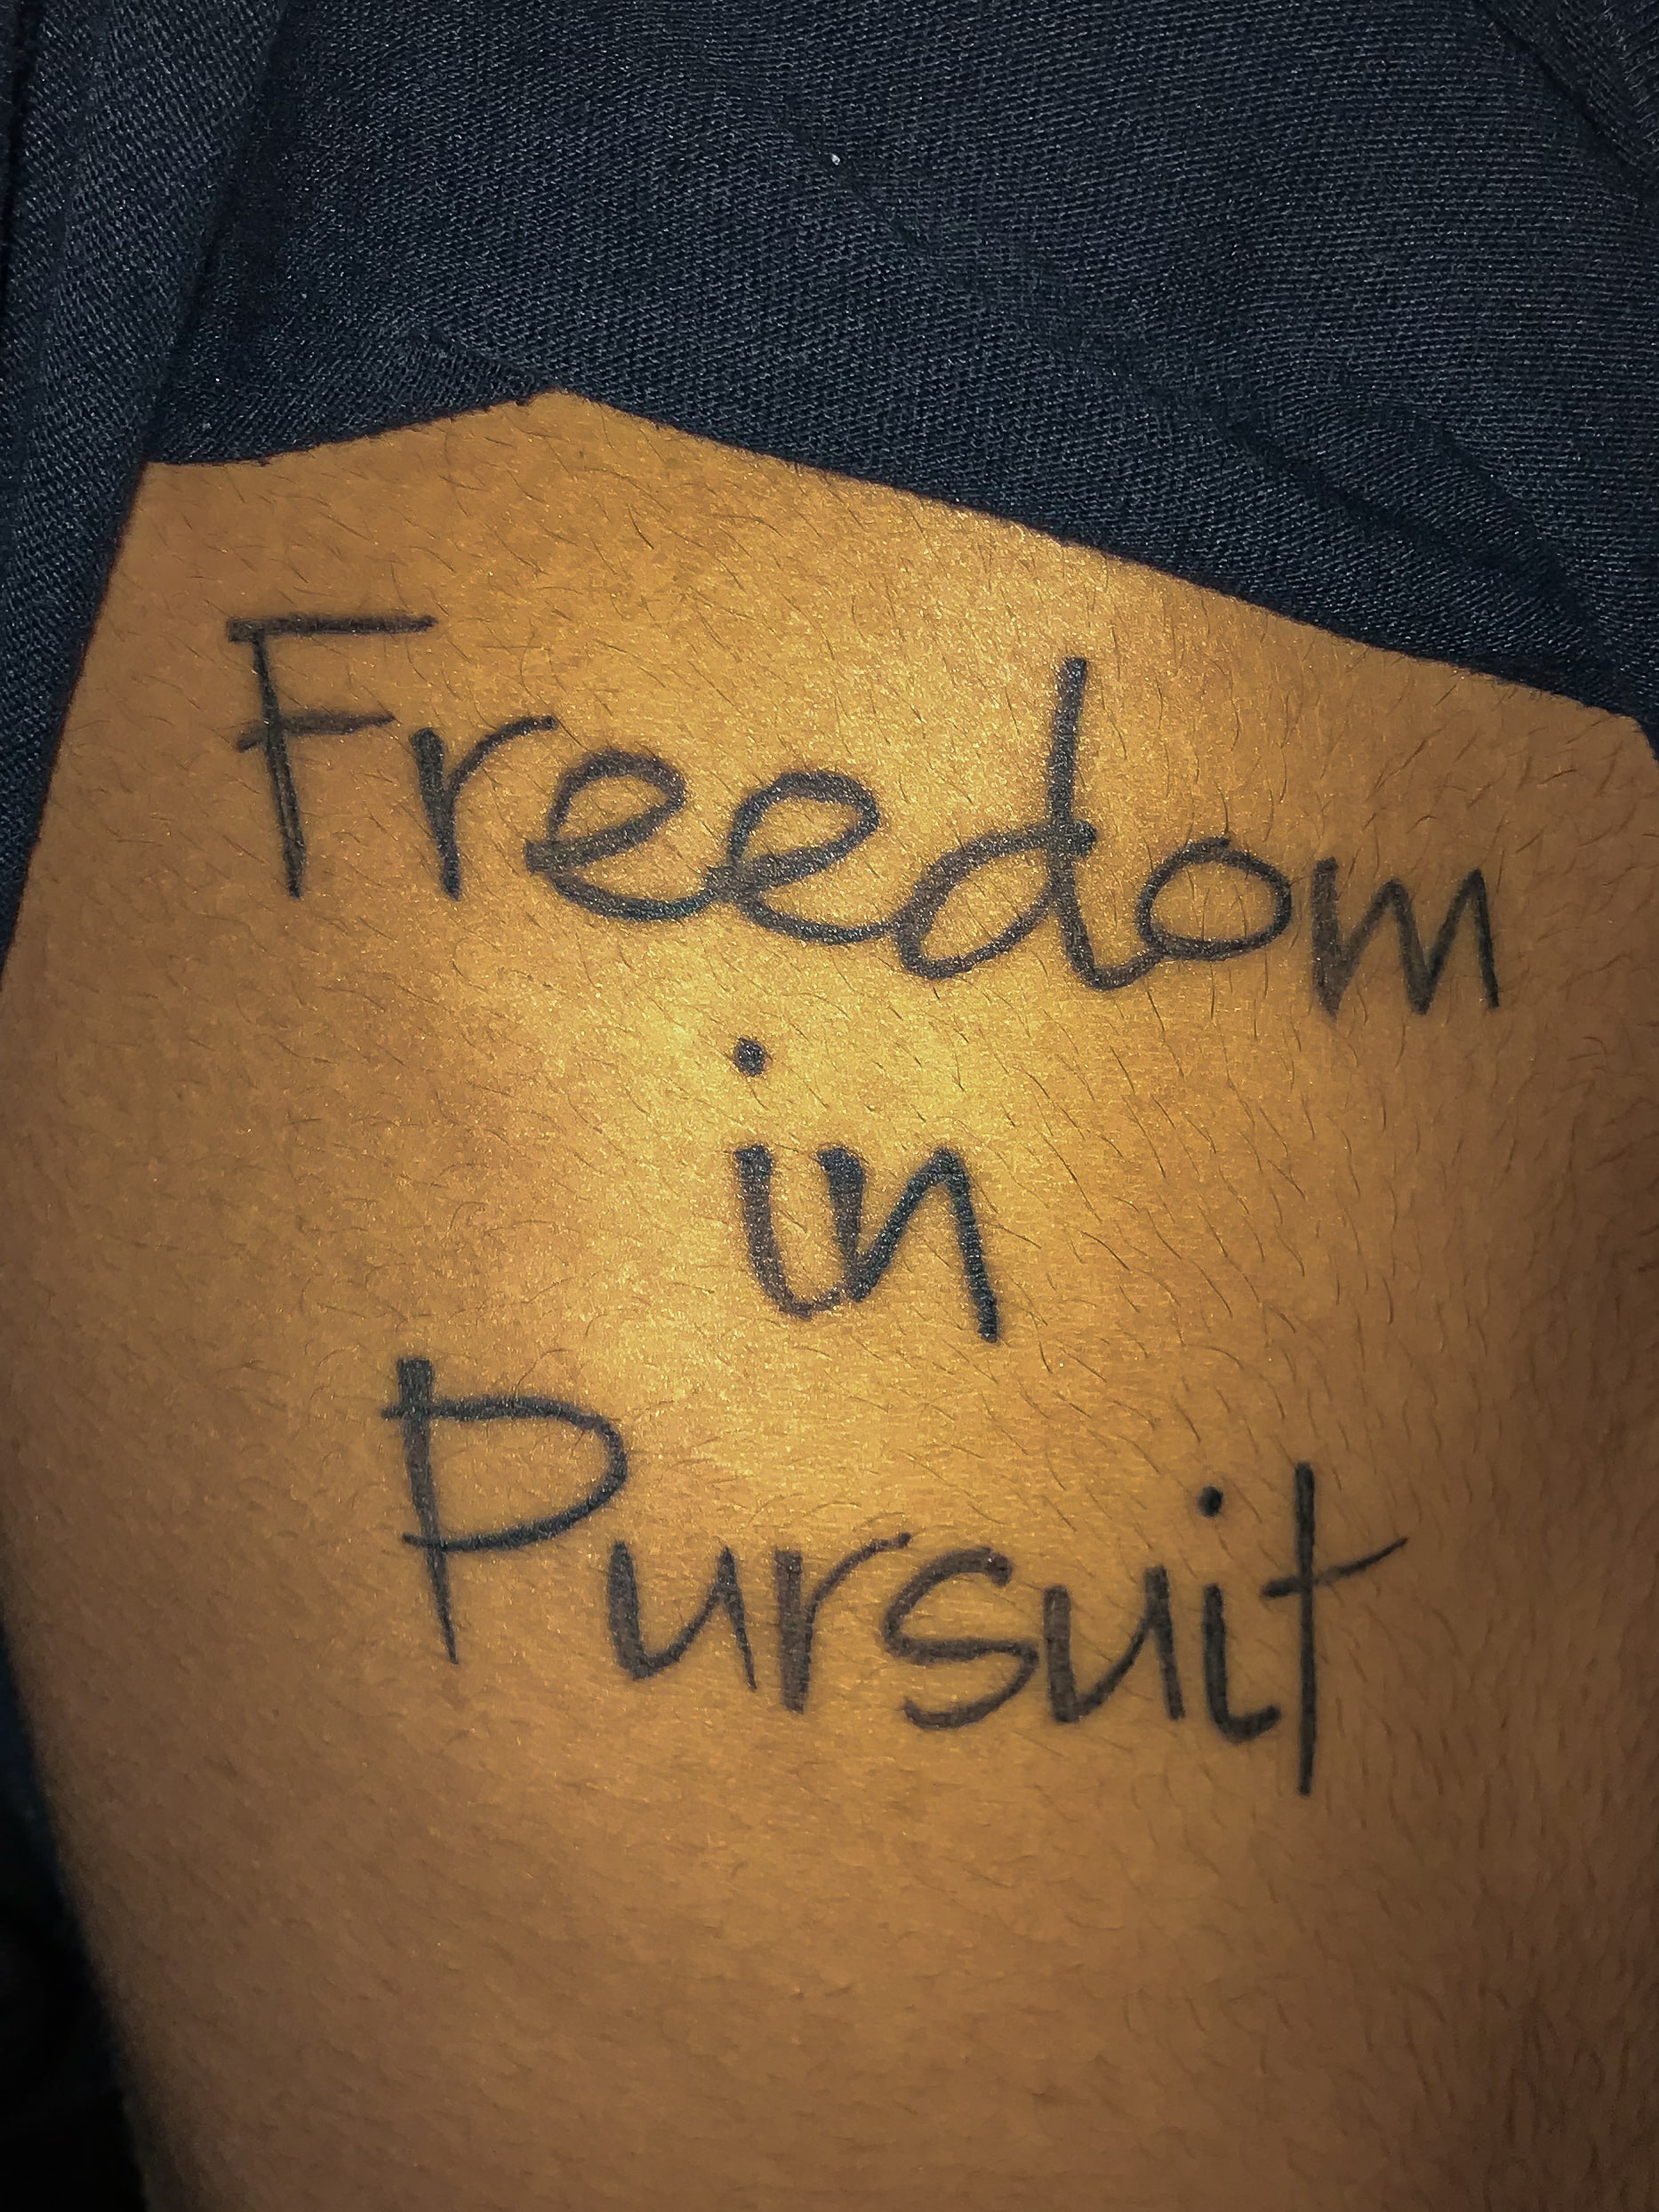 This is Isaac Langdon. Landon got this tattoo after feeling in bondage in sin that was weighing him down. After a weekend trip with a friend, Landon realized what freedom in pursuit truly meant. When Landon pursued the Father, he was able to find fr